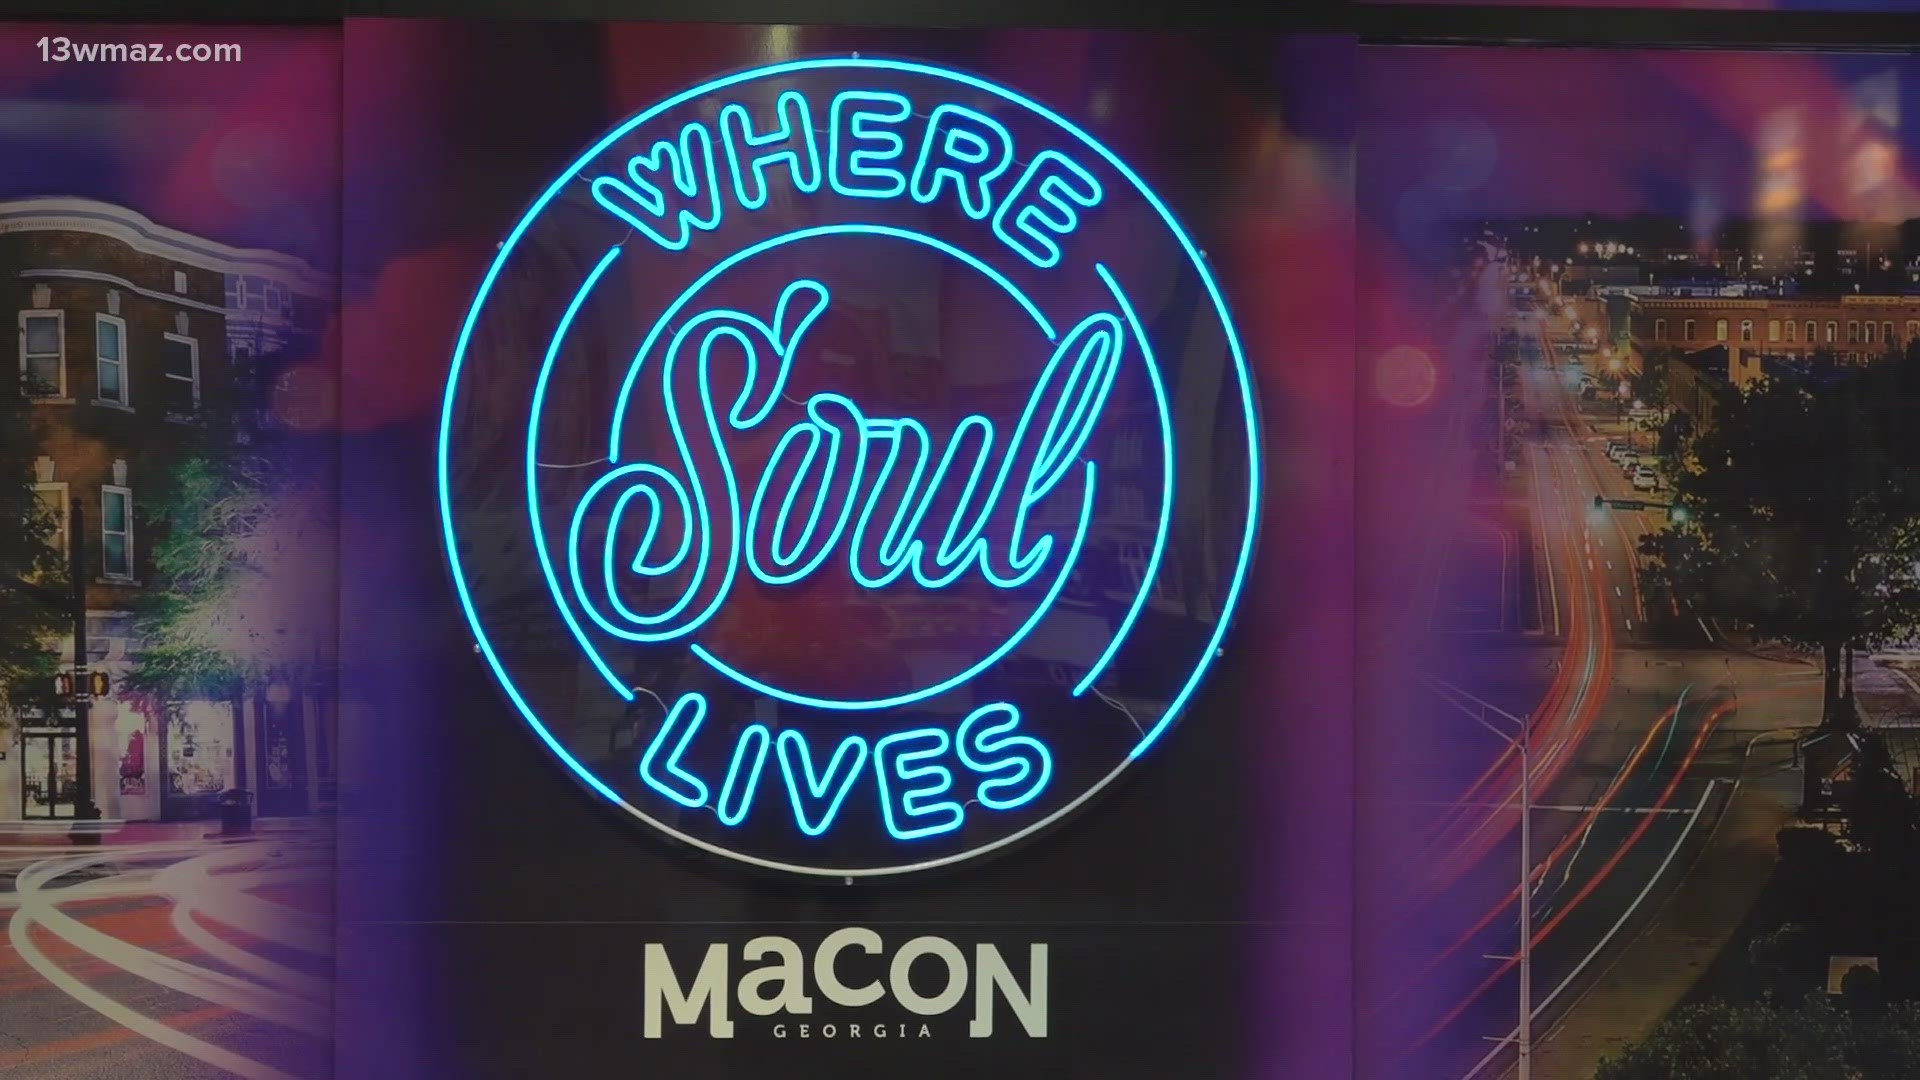 Visit Macon suggests if you take photos in any of the spots to use the hashtags #VisitMacon or #MaconMemories.